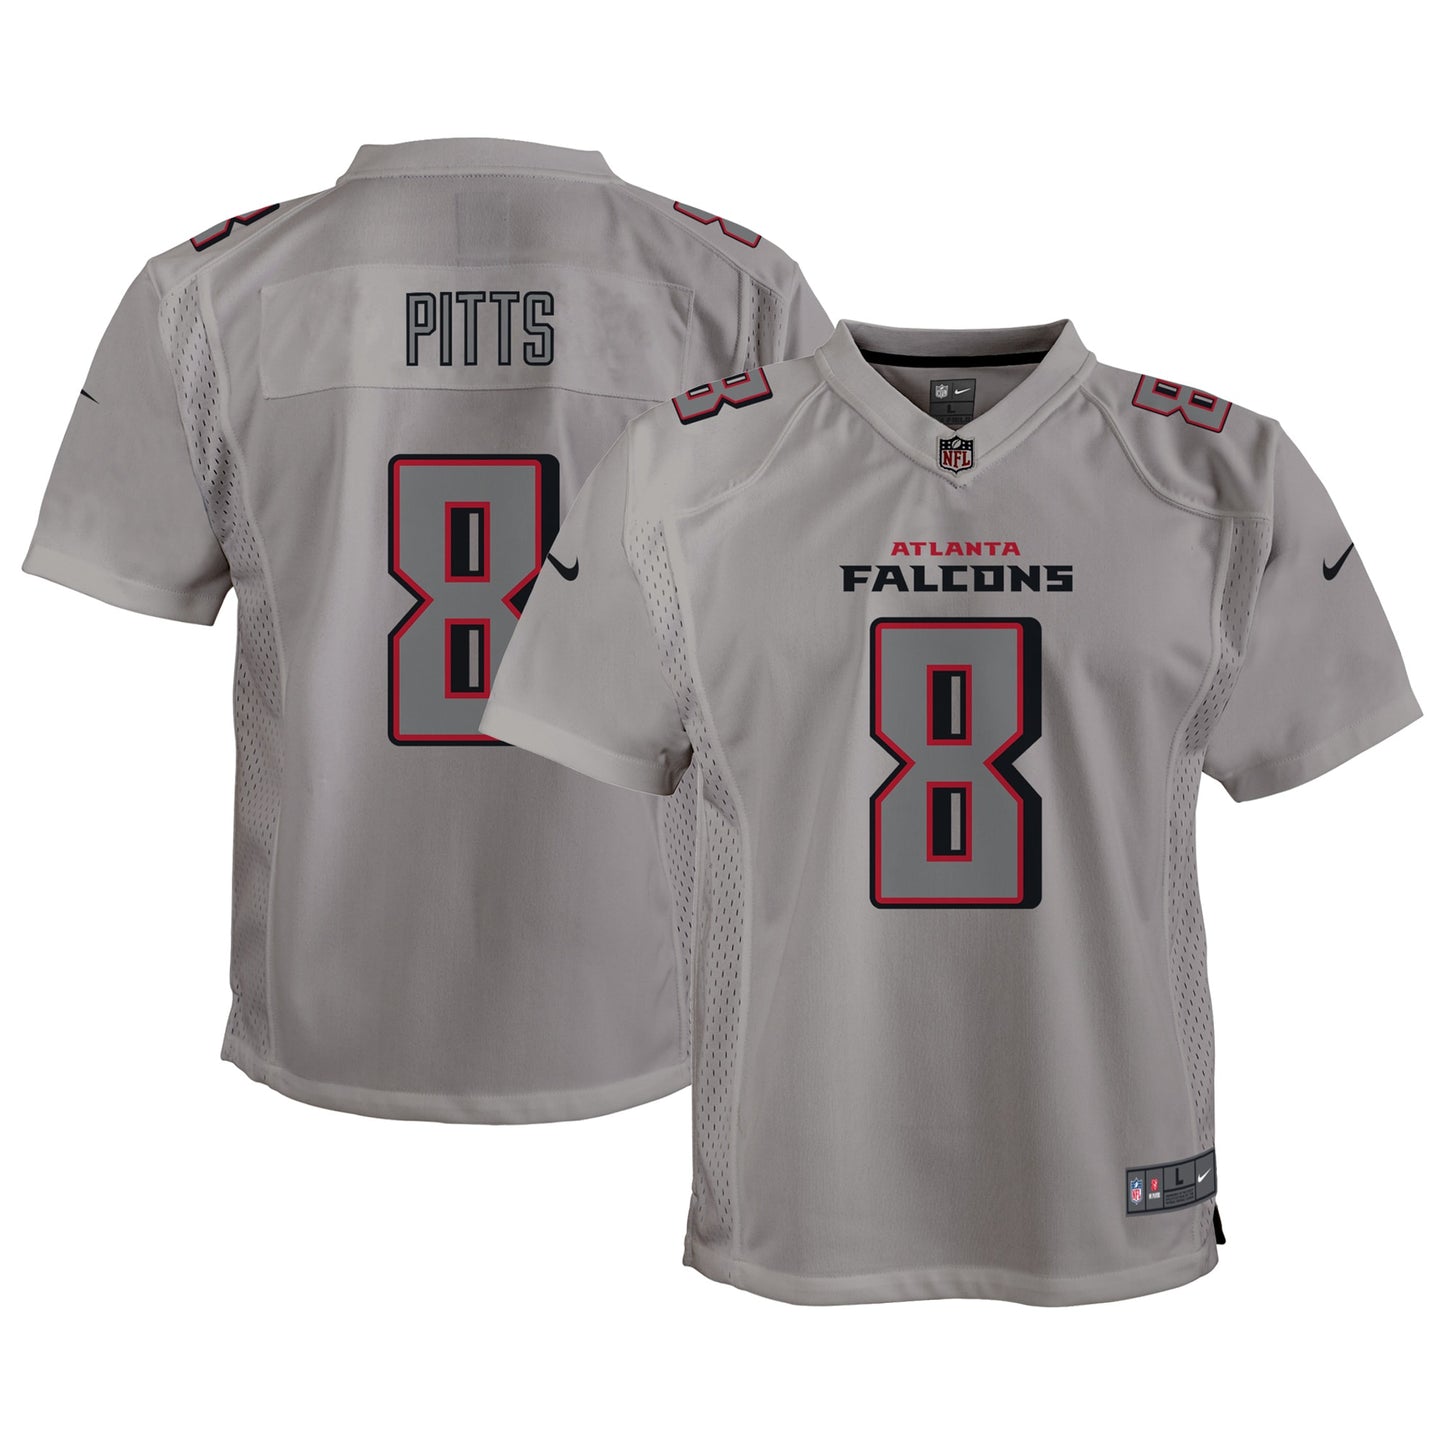 Kyle Pitts Atlanta Falcons Nike Youth Atmosphere Game Jersey - Gray